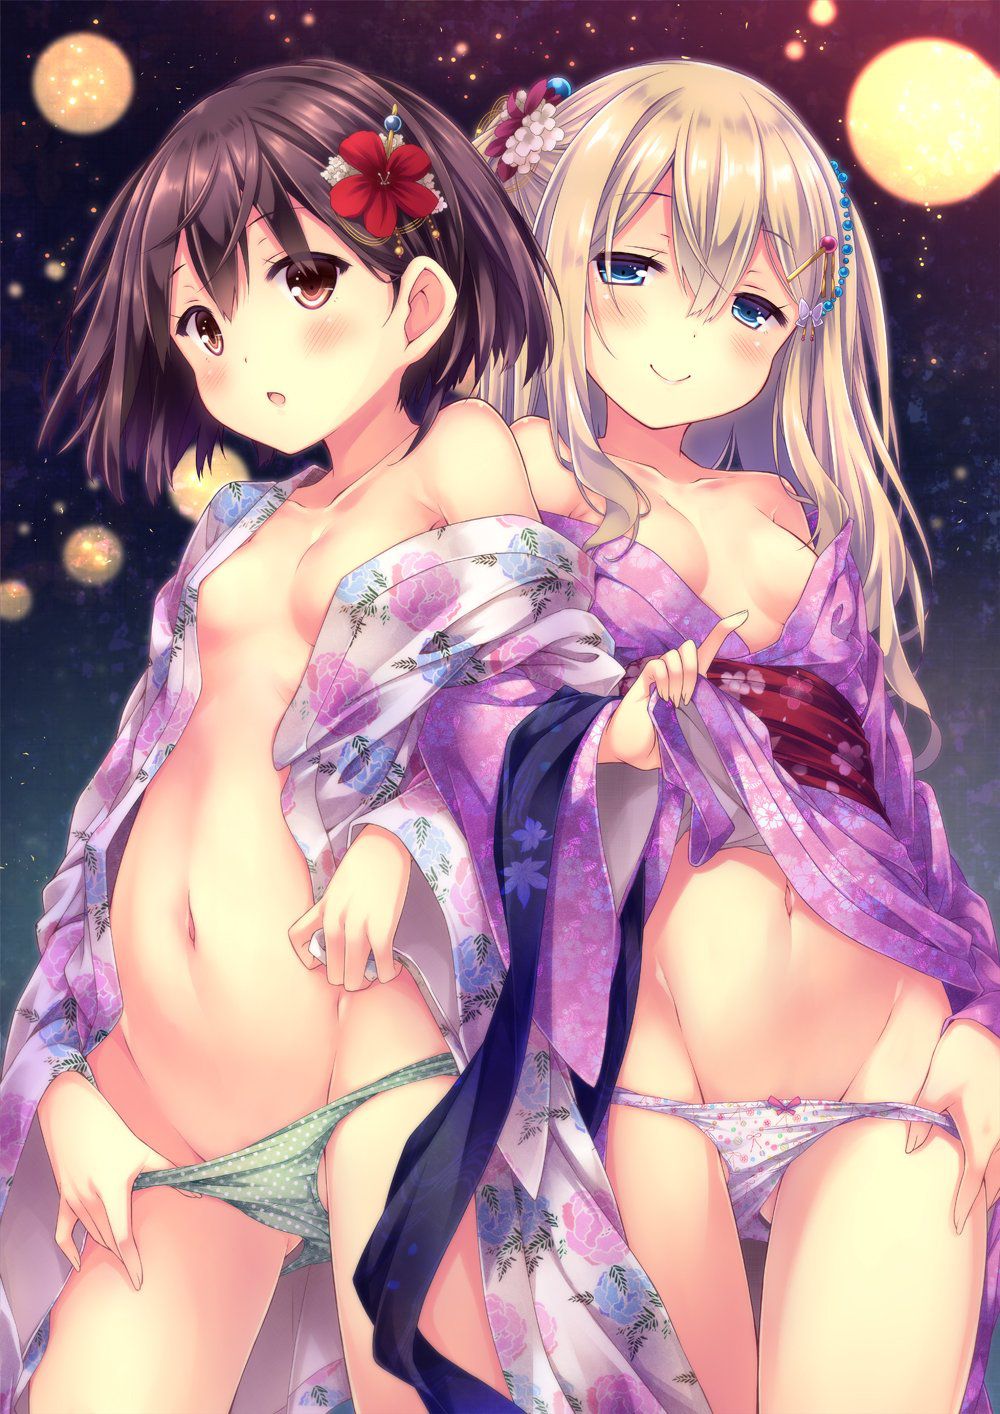 Lori Harrem erotic image come to seduce or throws here with two people in collusion and colluding with friends or sisters Lori Girl is [Temptation Loli]! 37